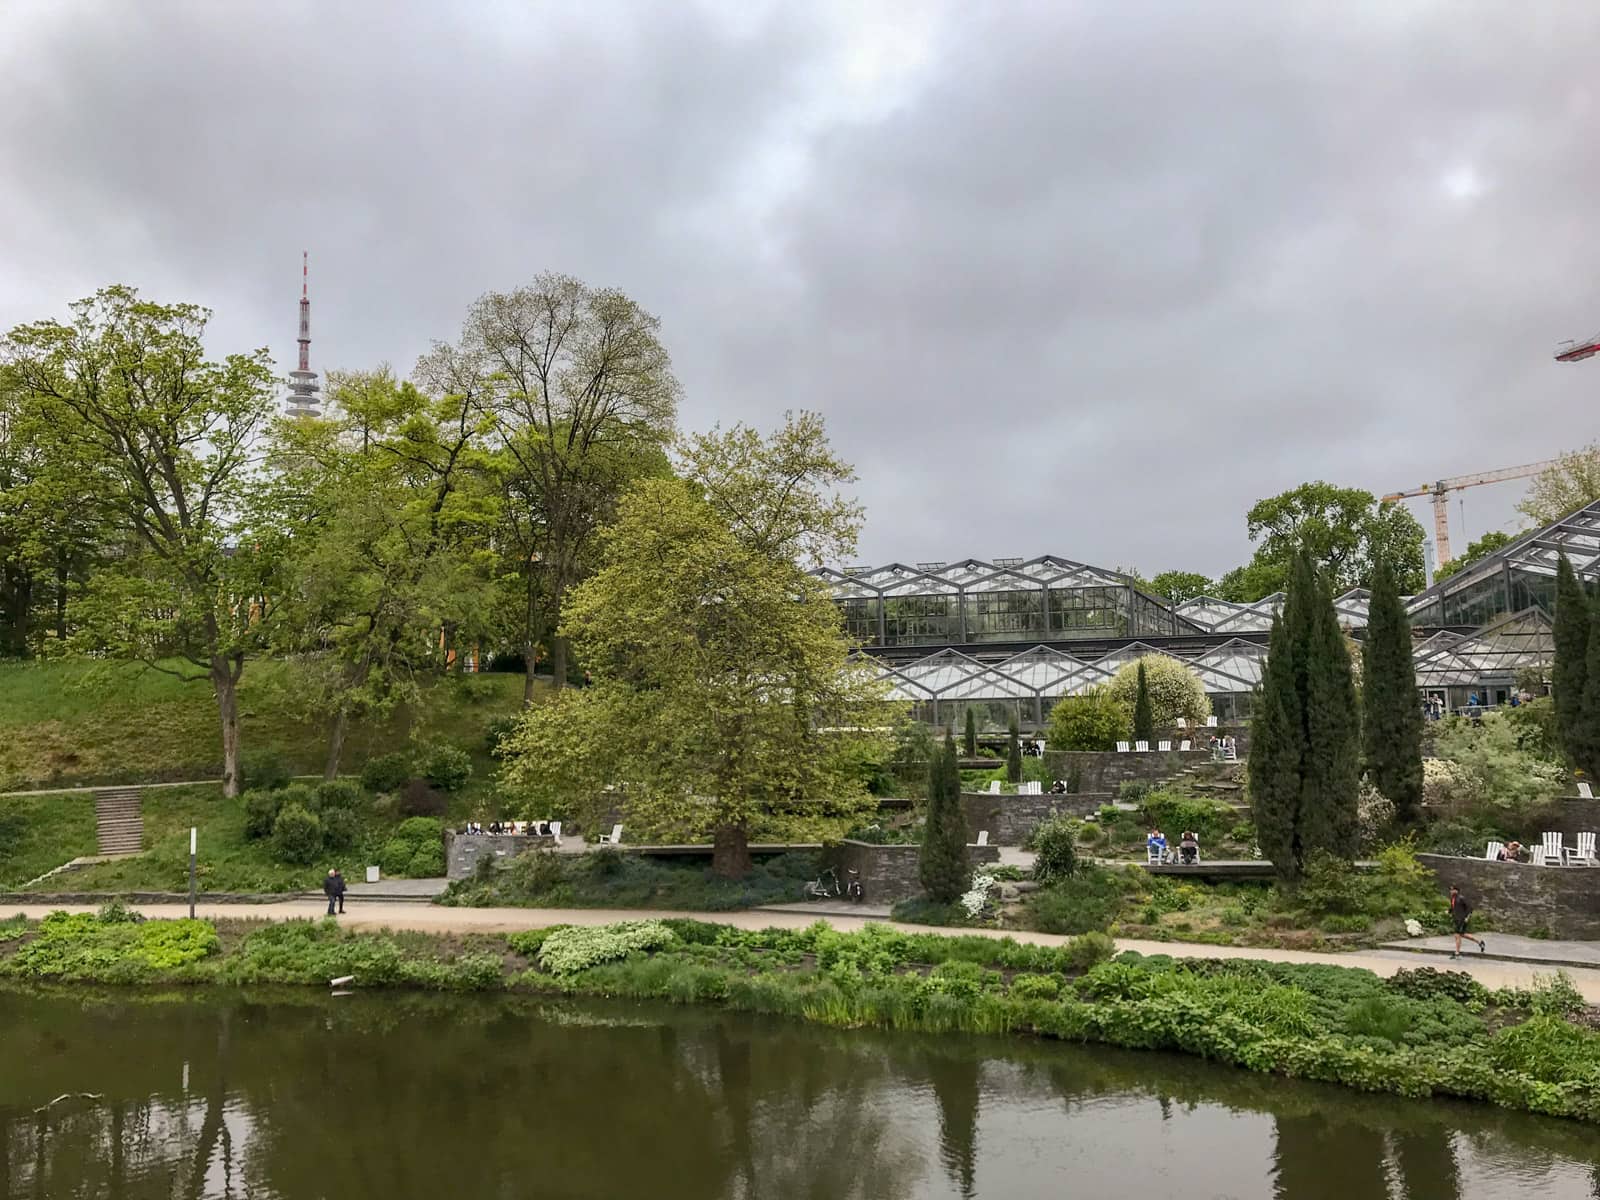 The inside of a park, with a river in the foreground, and greenhouses in the background. There are many trees in the park